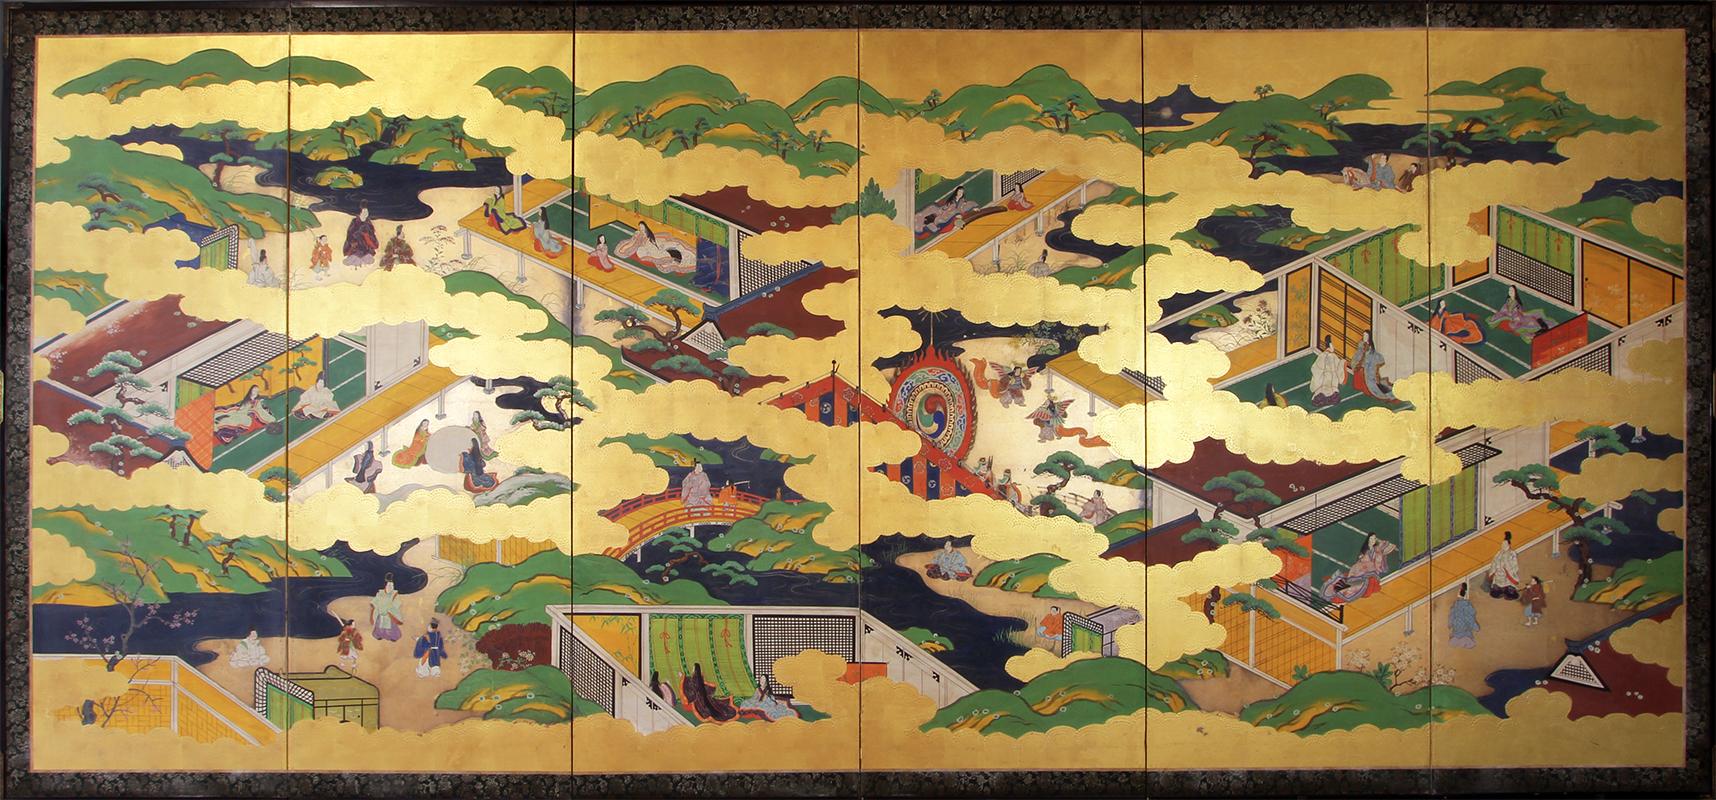 A large six-panel Japanese folding screen, ink, colors, gold and gold leaf on paper, depicting three scenes from Genji monogatari (Tale of Genji), the vignettes dotted with gold clouds in relief.